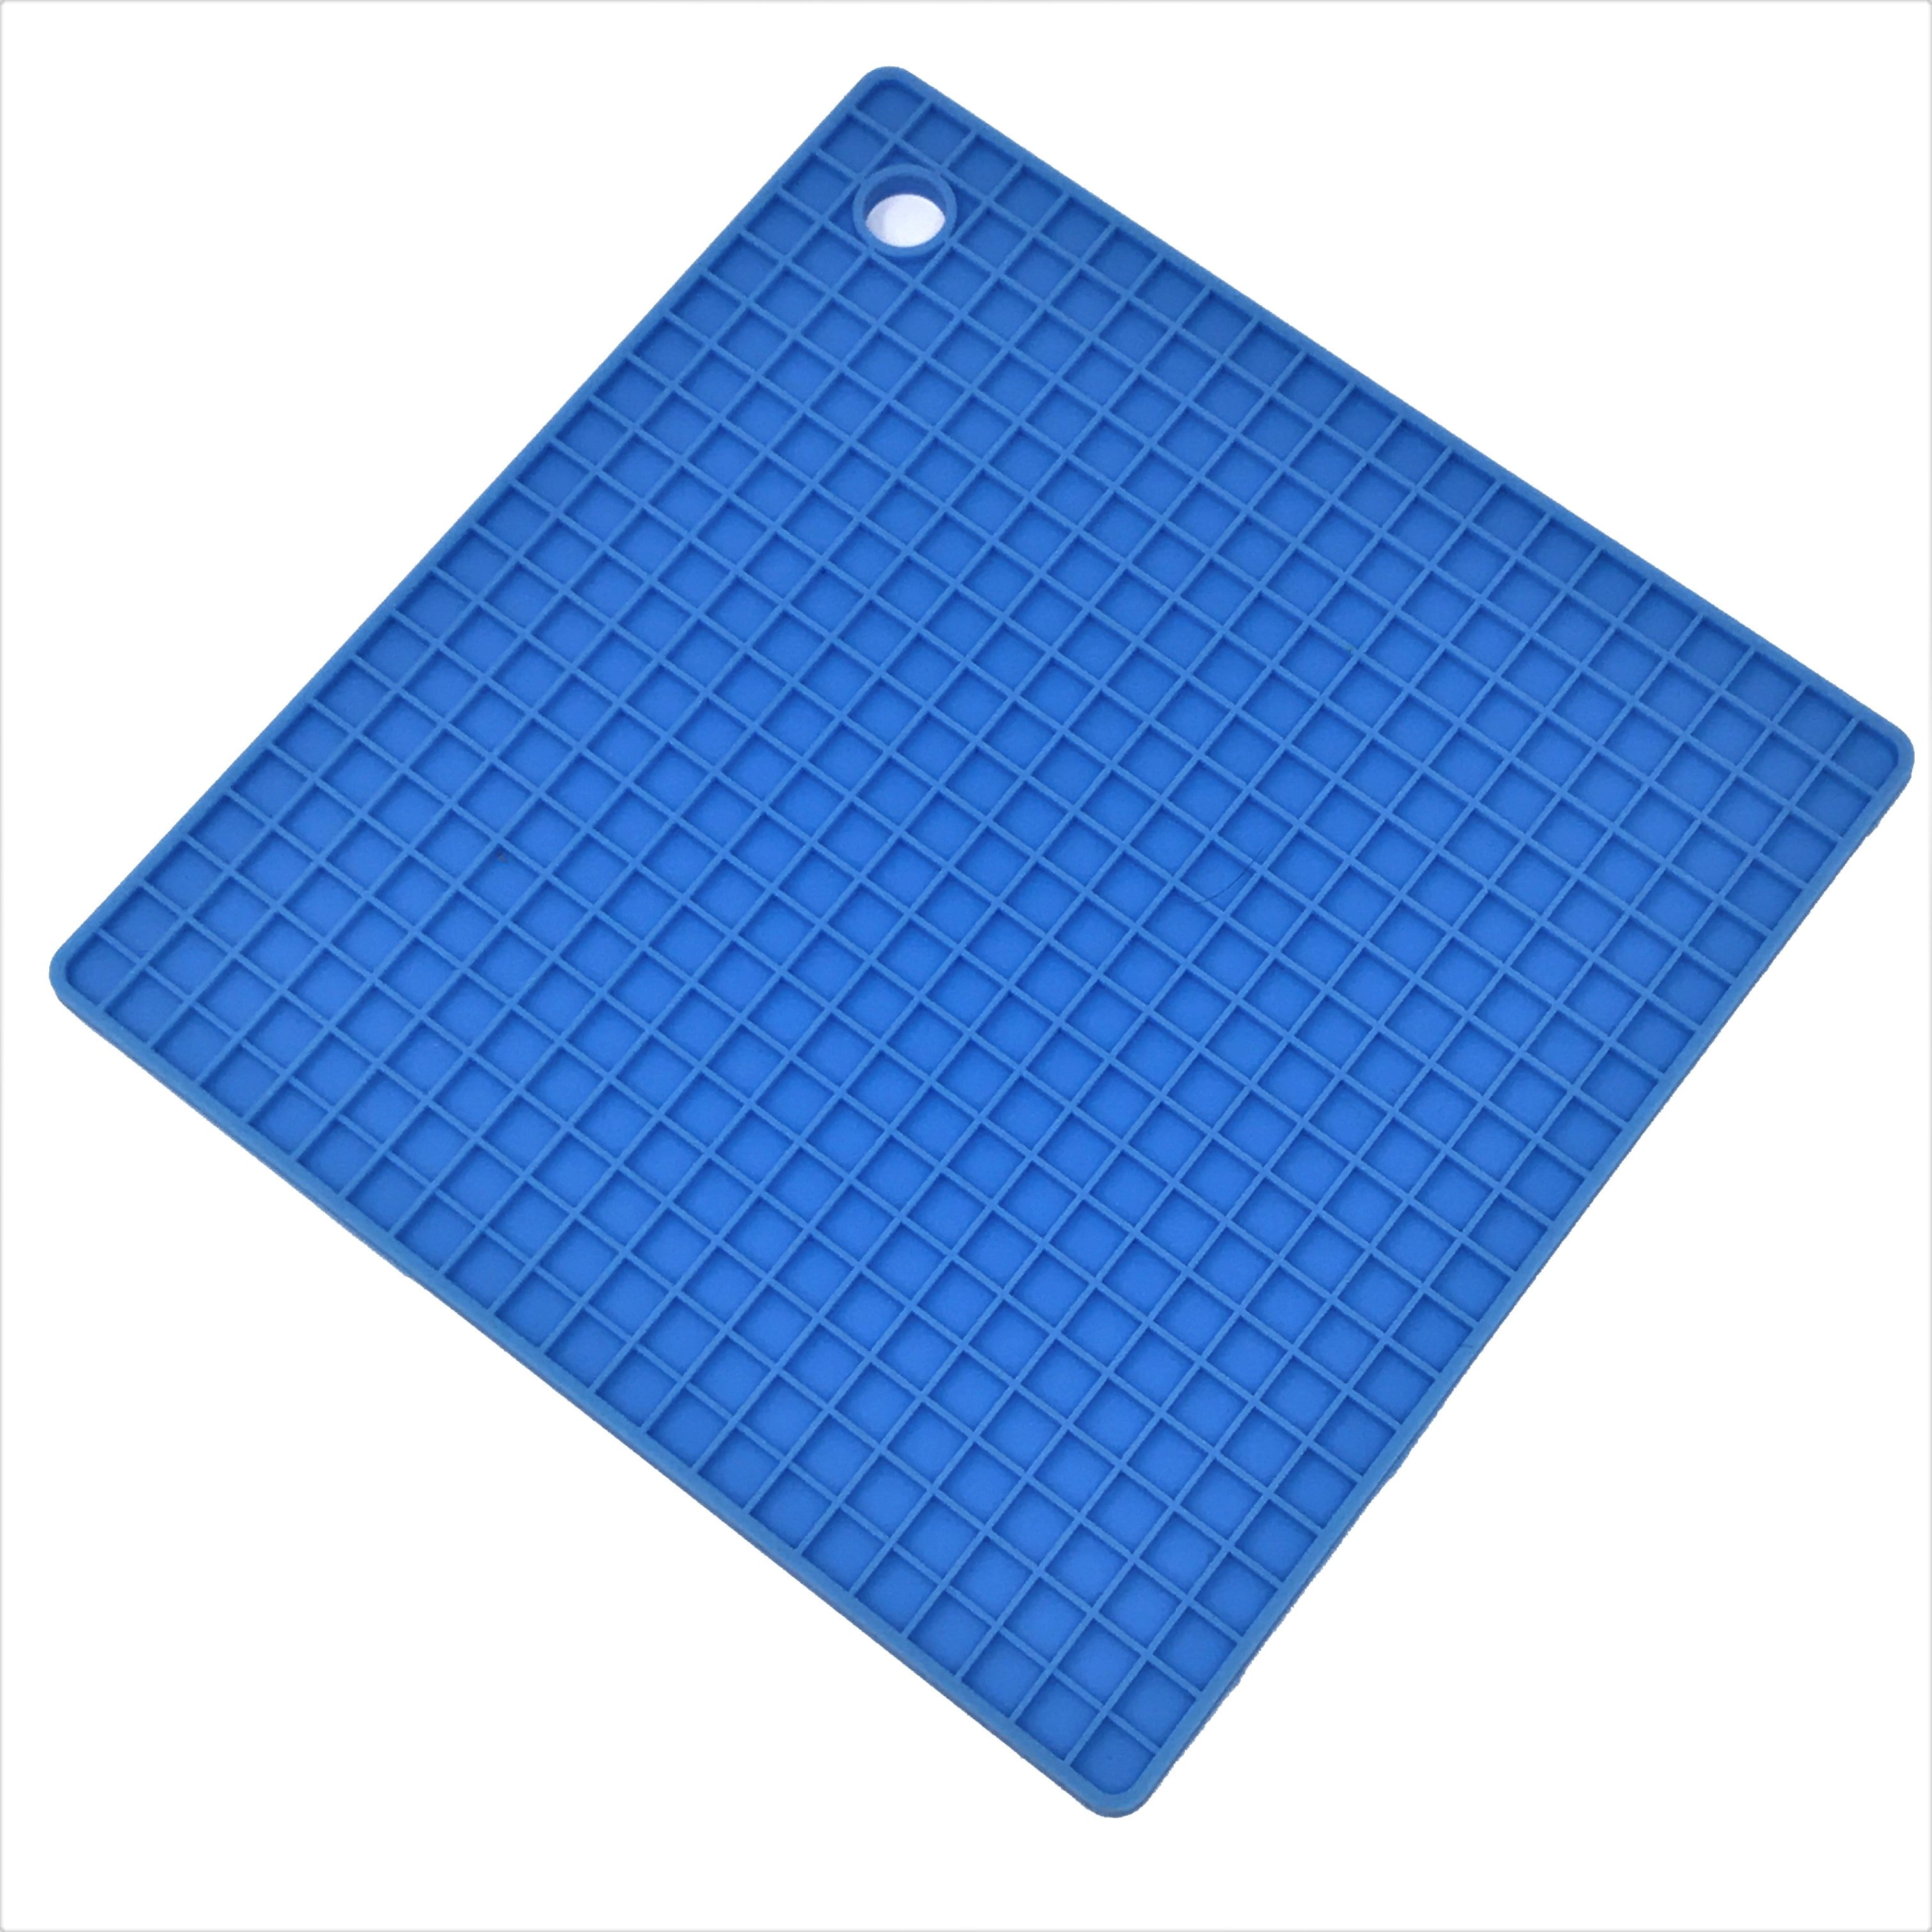 https://www.silcreations.com/cdn/shop/products/Square_Hot_Plate_Blue.JPG?v=1510331324